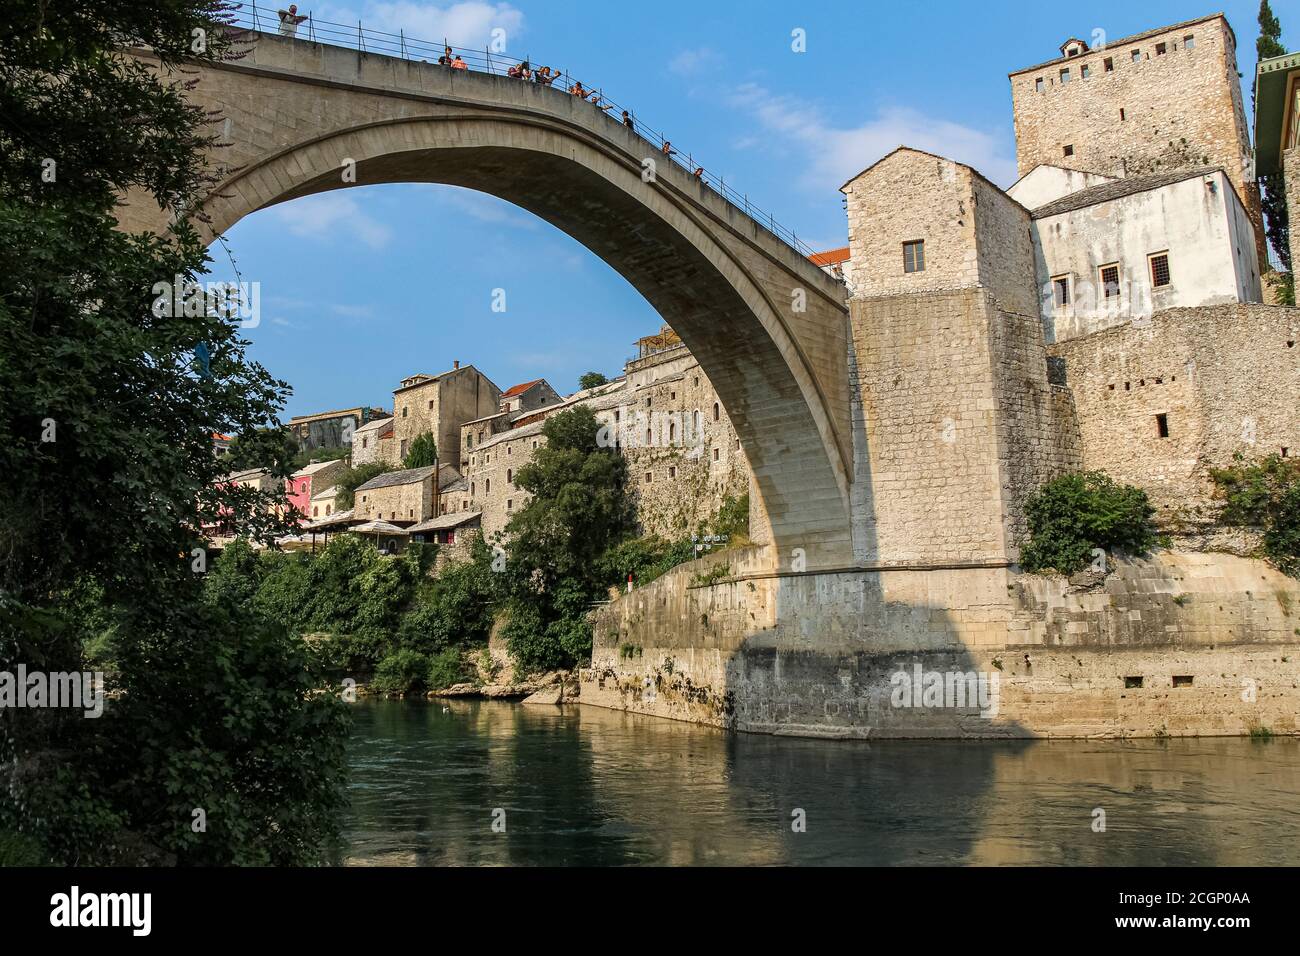 Mostar, Bosnia and Herzegovina - July 4th 2018: Close up of the historic arched Old Bridge of Mostar on the Neretva River, in the old town of Mostar, Stock Photo